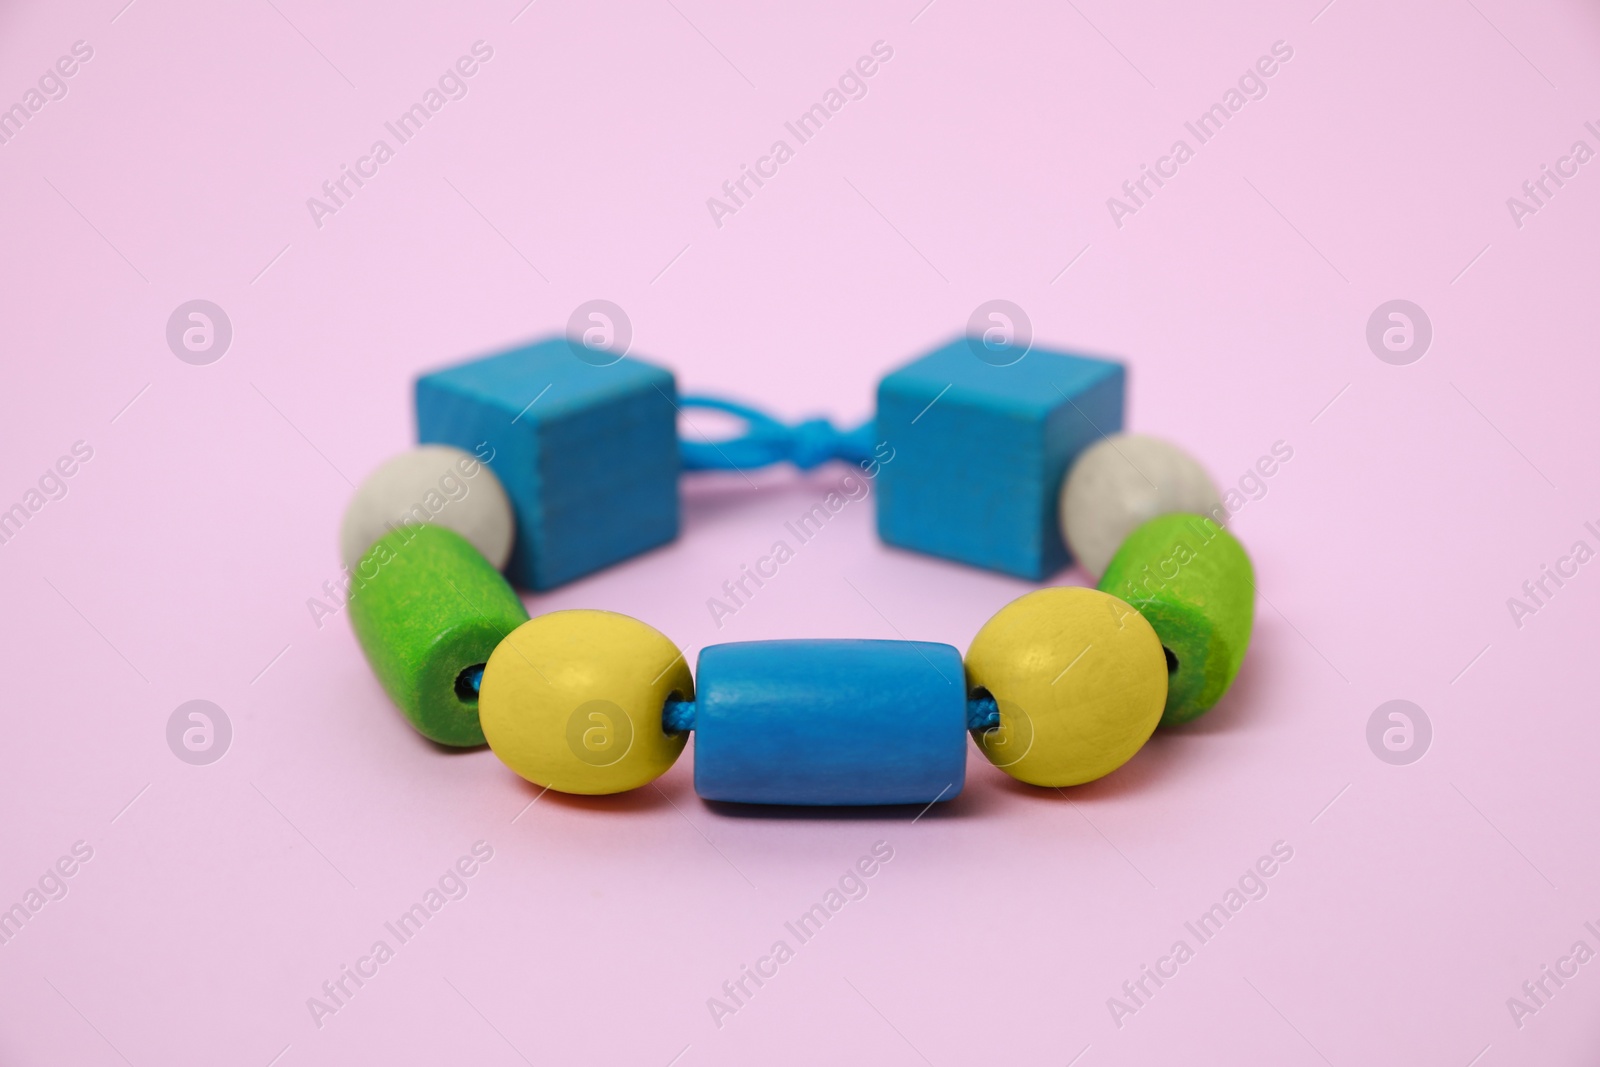 Photo of Wooden pieces and string for threading activity on pink background, closeup. Educational toy for motor skills development